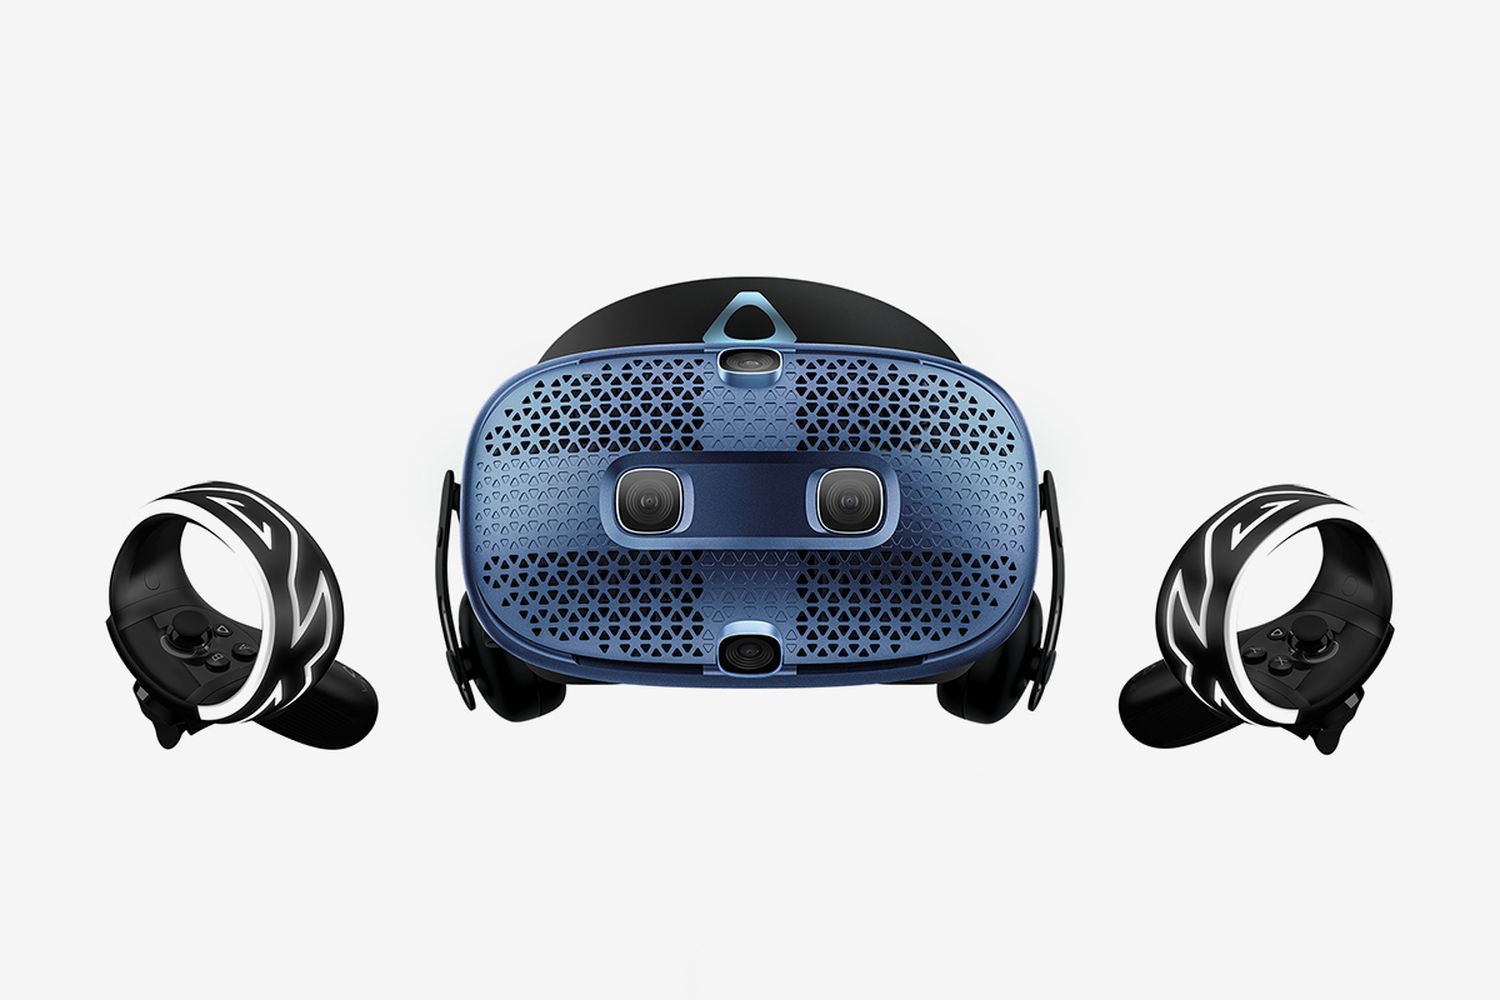 VIVE Cosmos VR Headset & System